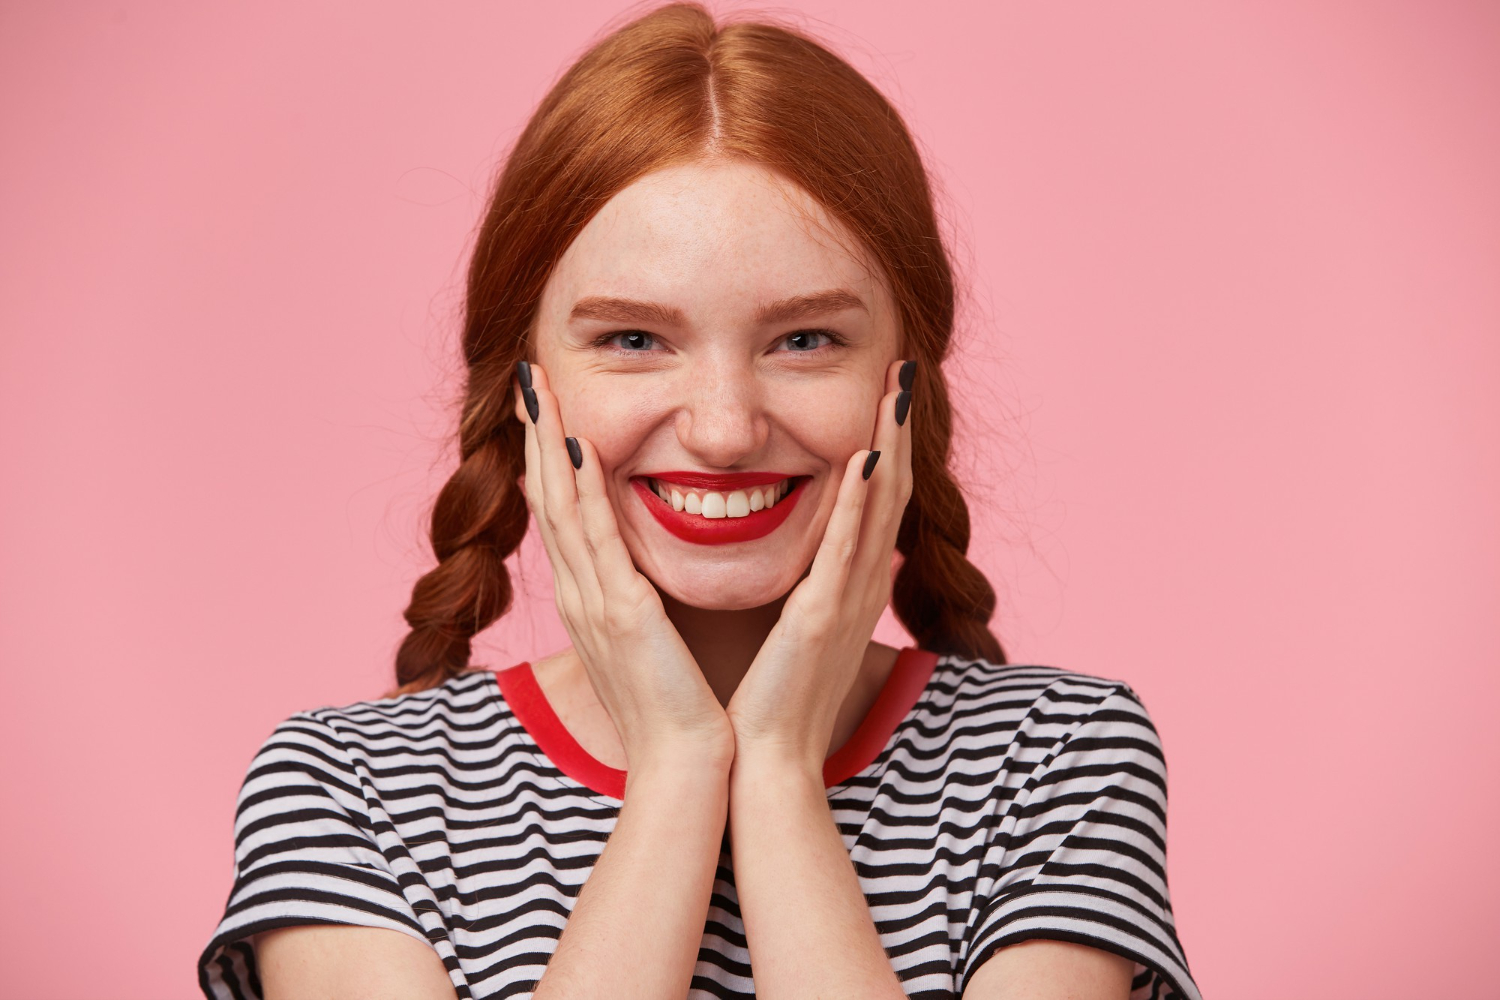 close up glad joyful beautiful red haired girl with two braids keeps hands near her face smiling rosily